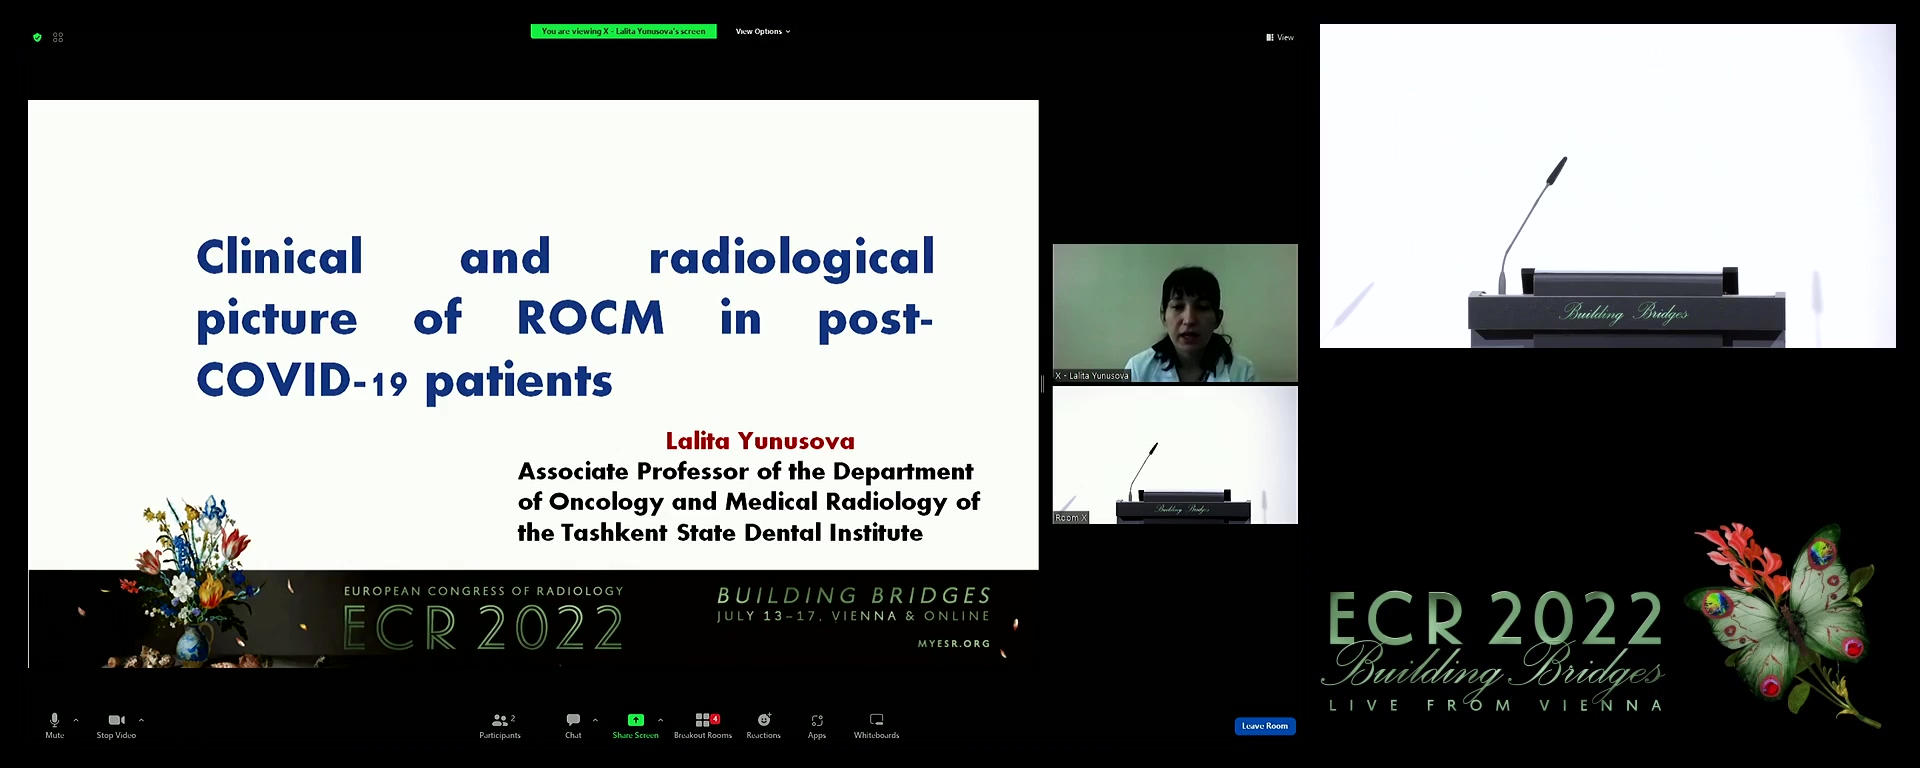 Clinical and radiological picture of ROCM in post-COVID-19 patients